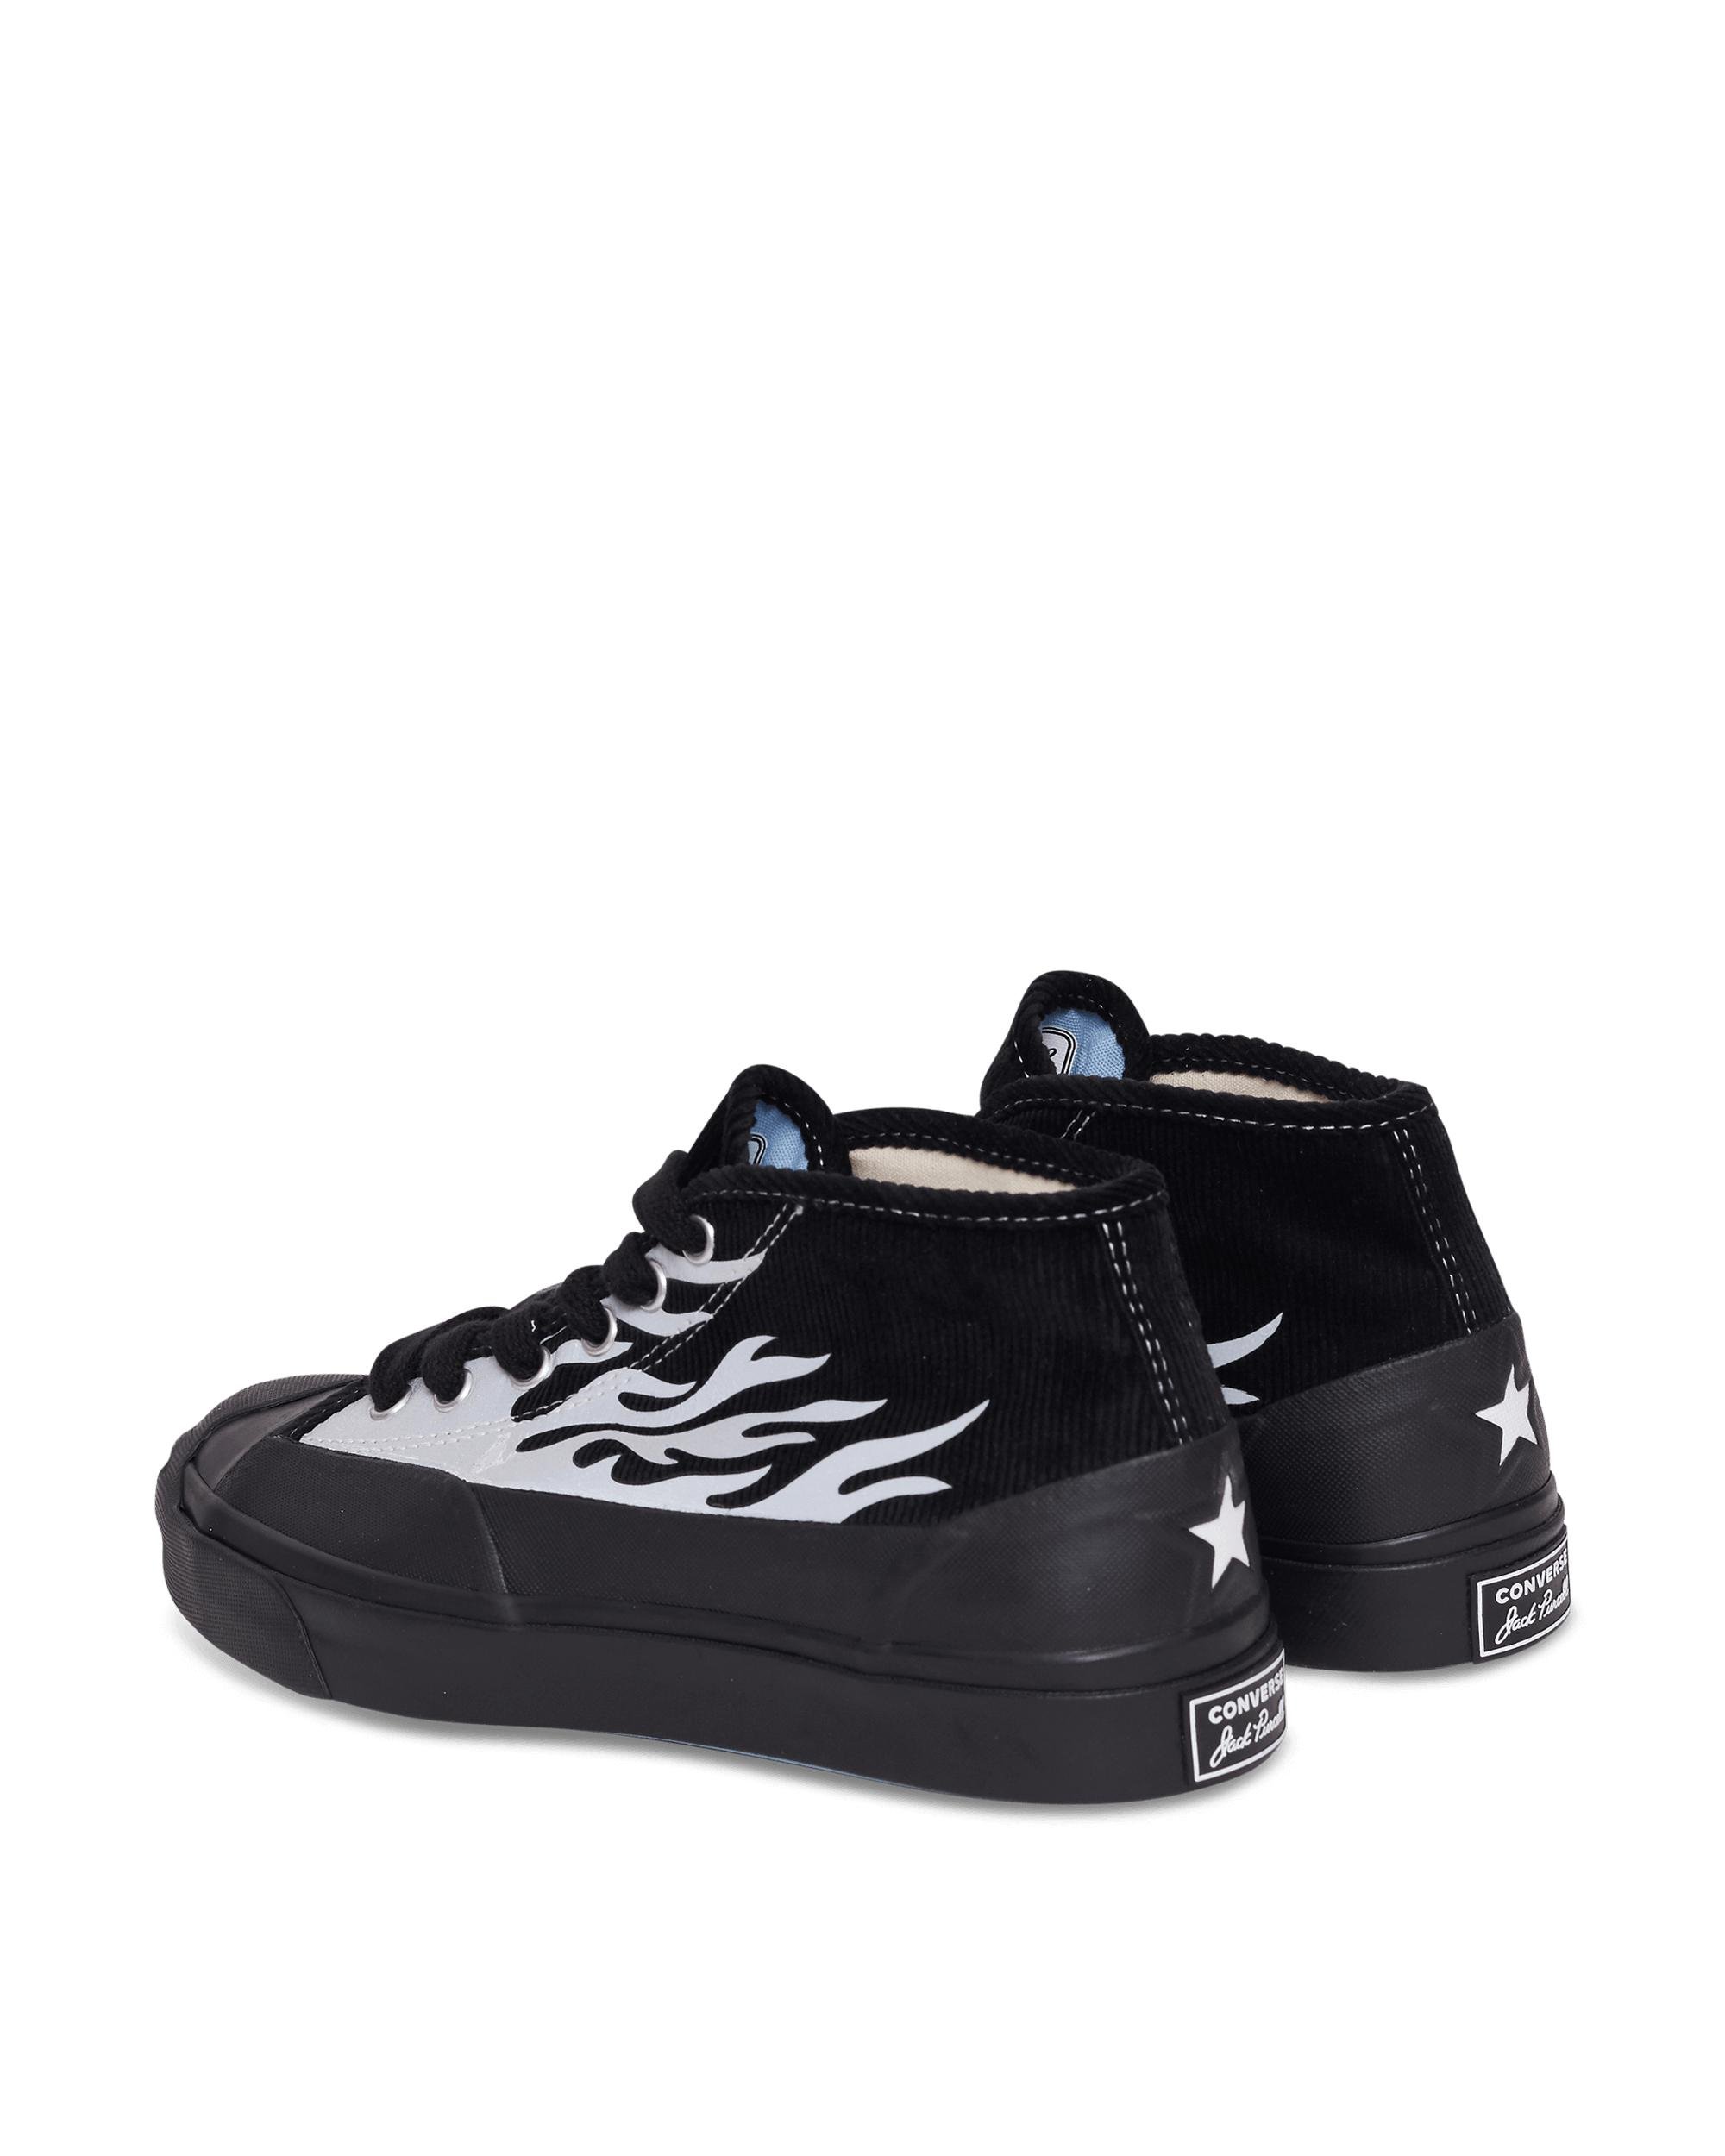 Converse X A$ap Nast Jack Purcell Chukka Mid-top Sneakers in Black 